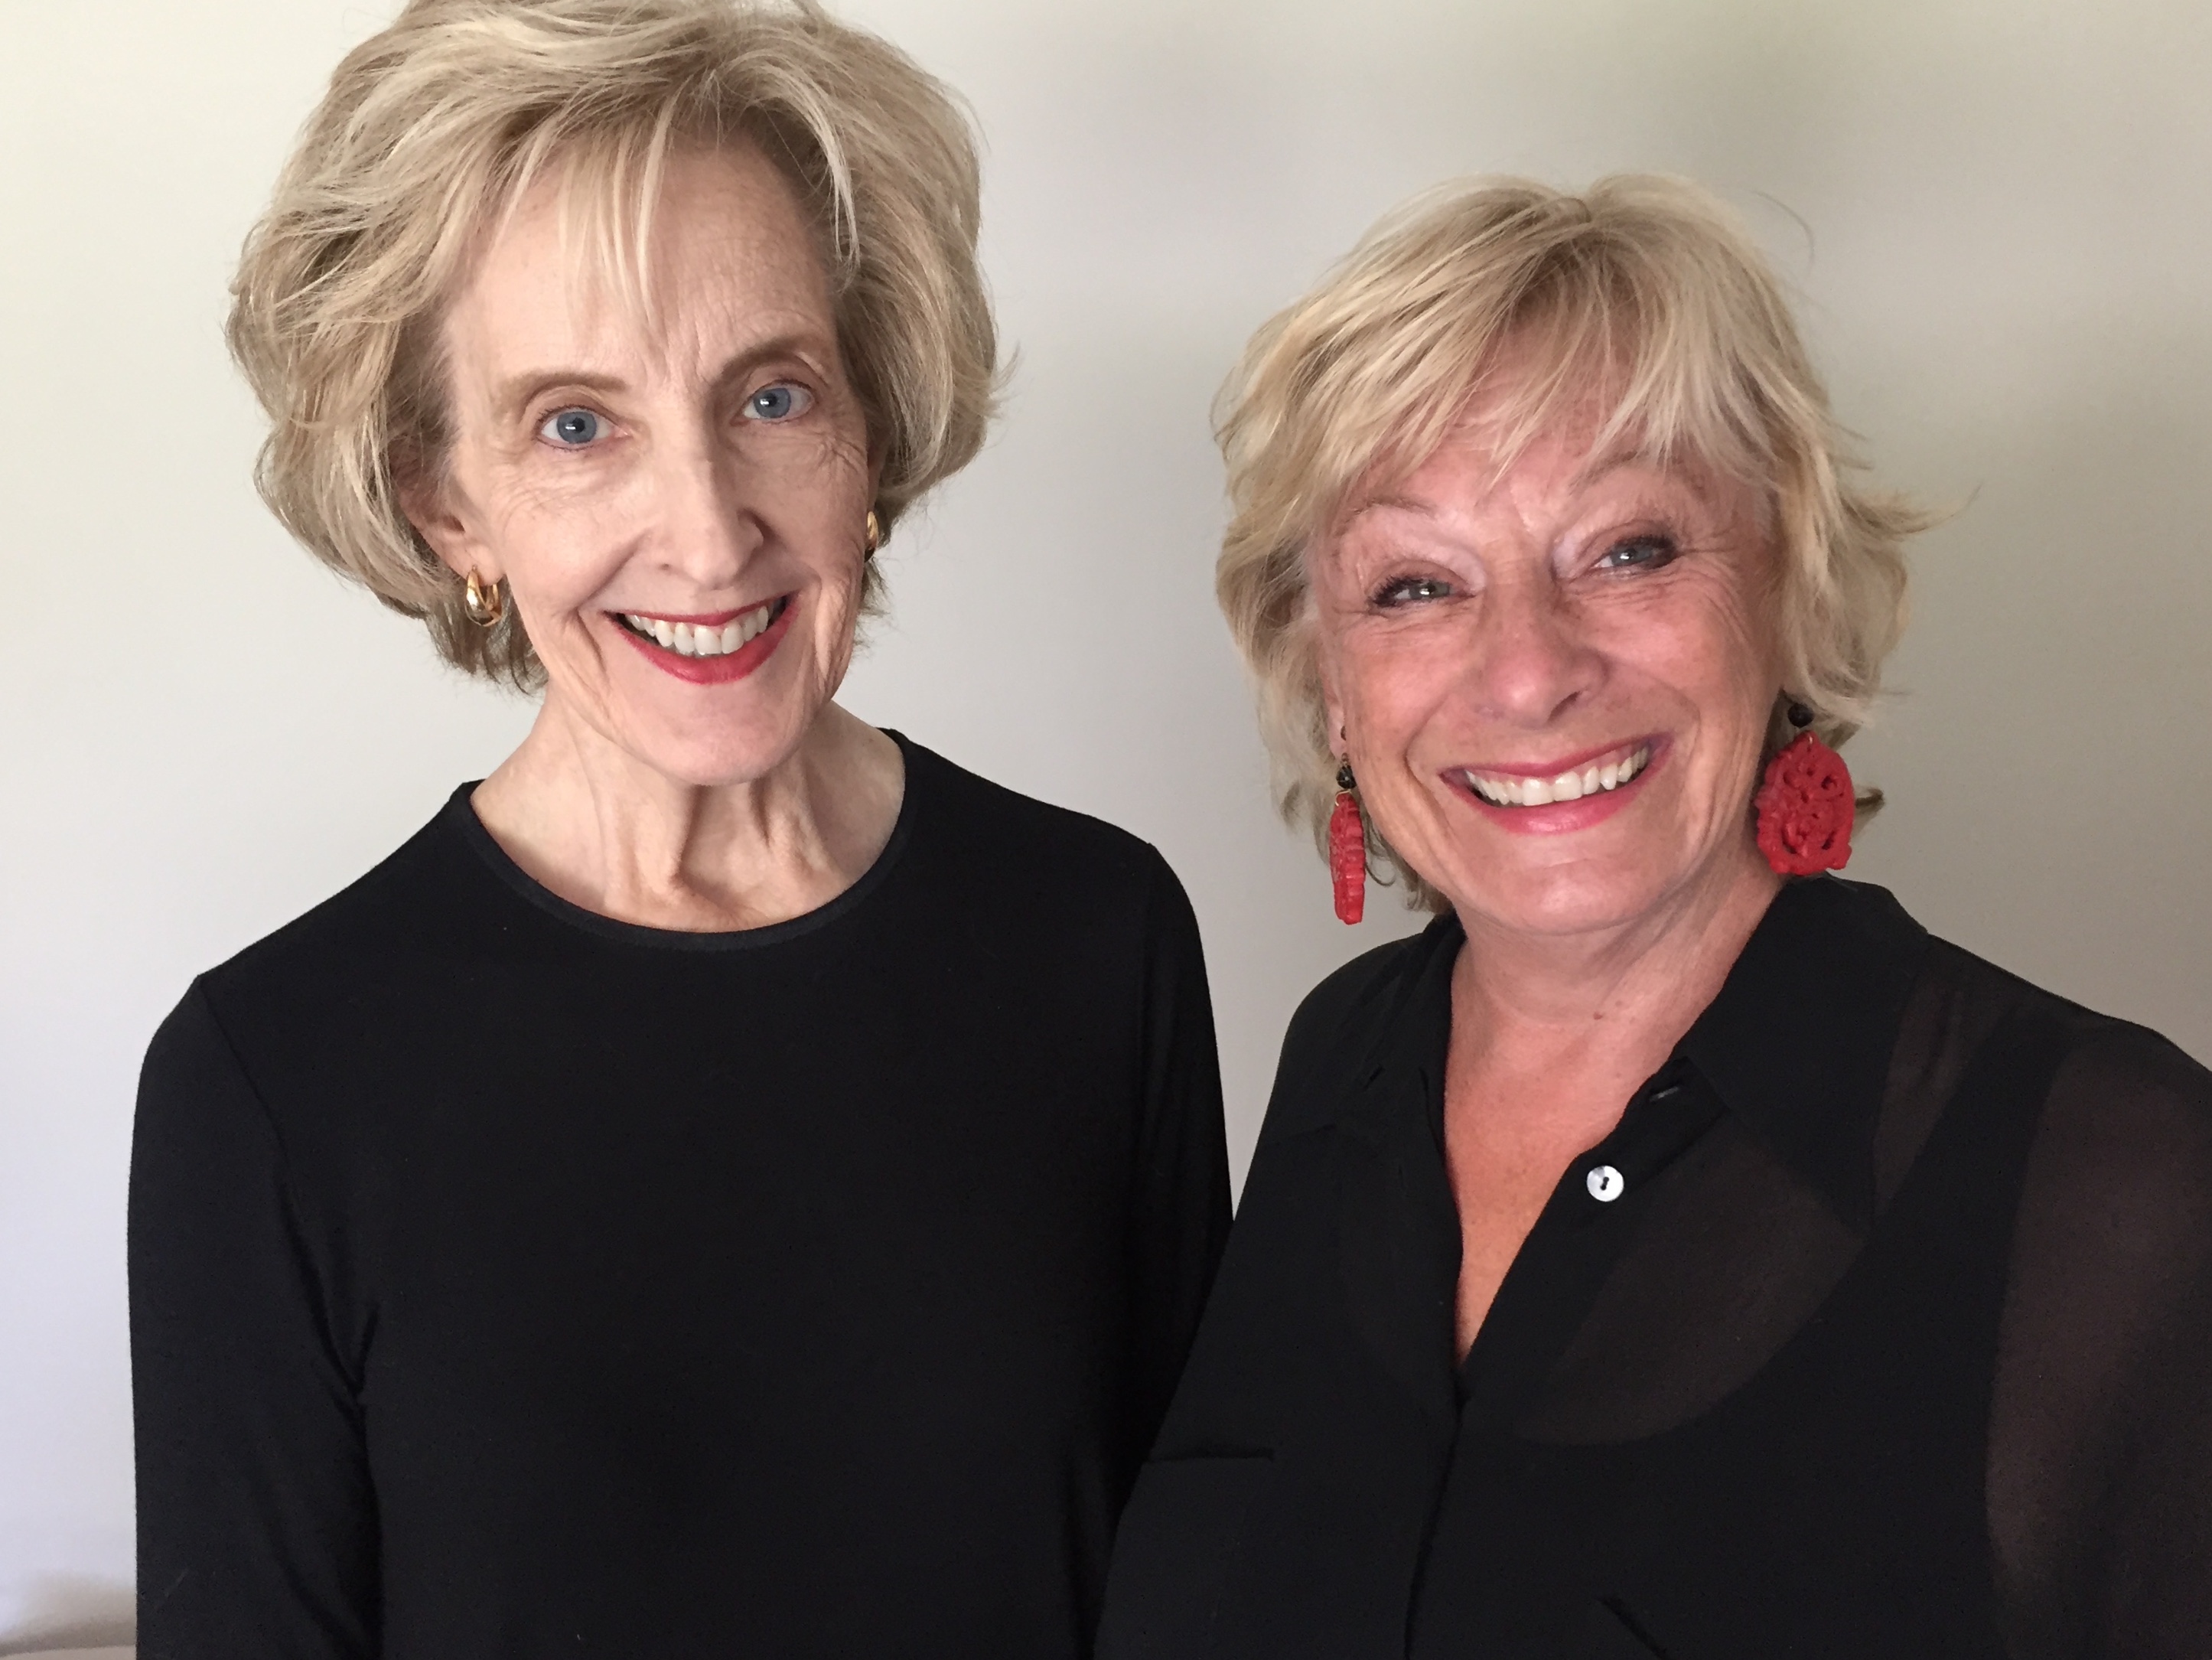 Anna Norberg (left), Connie Cronley (right)